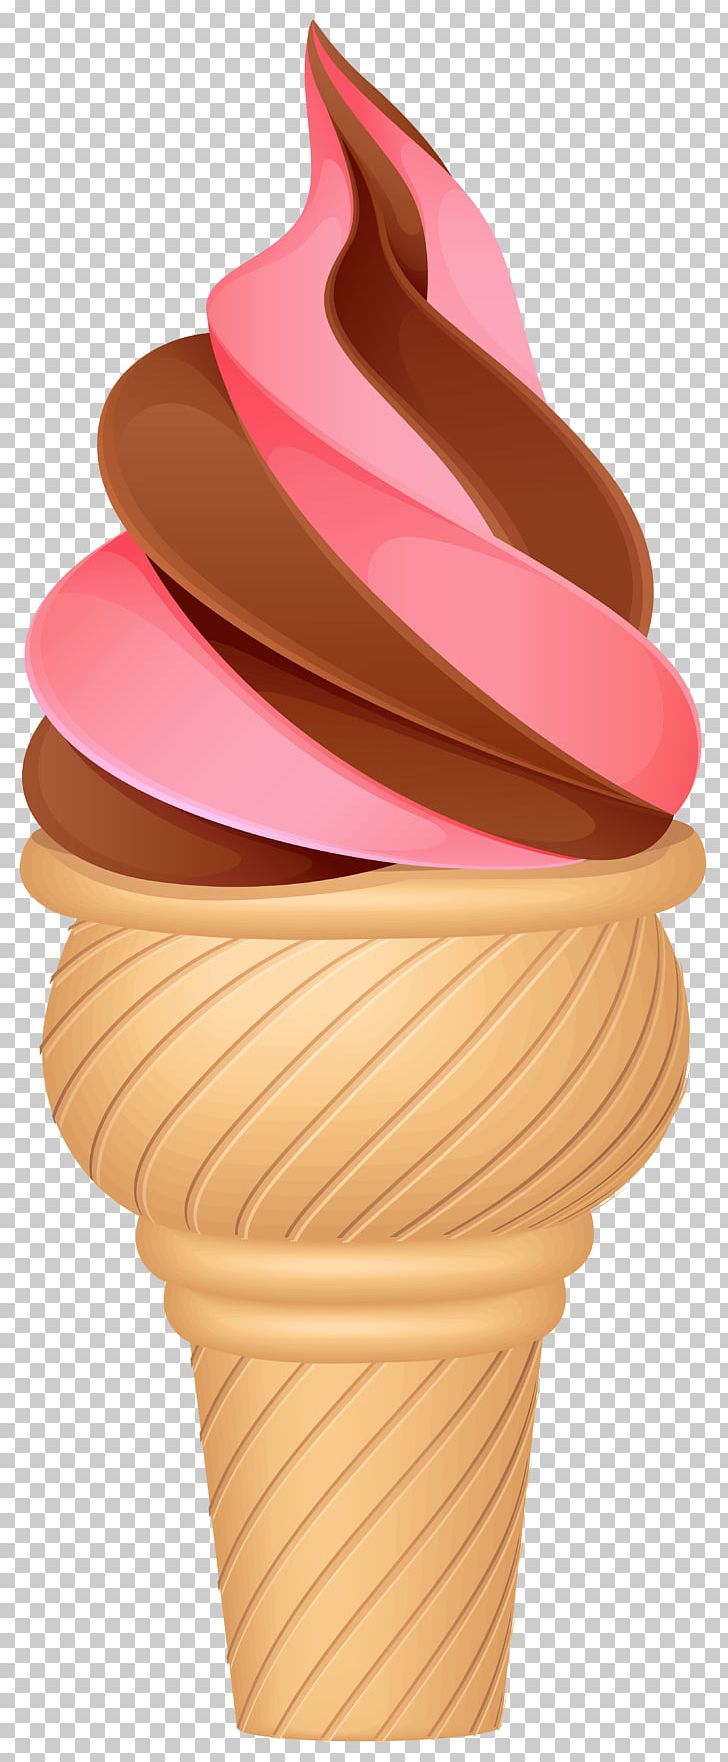 Ice Cream Cones Chocolate Ice Cream Neapolitan Ice Cream PNG, Clipart, Chocolate Ice Cream, Cream, Dairy Product, Dairy Products, Dessert Free PNG Download